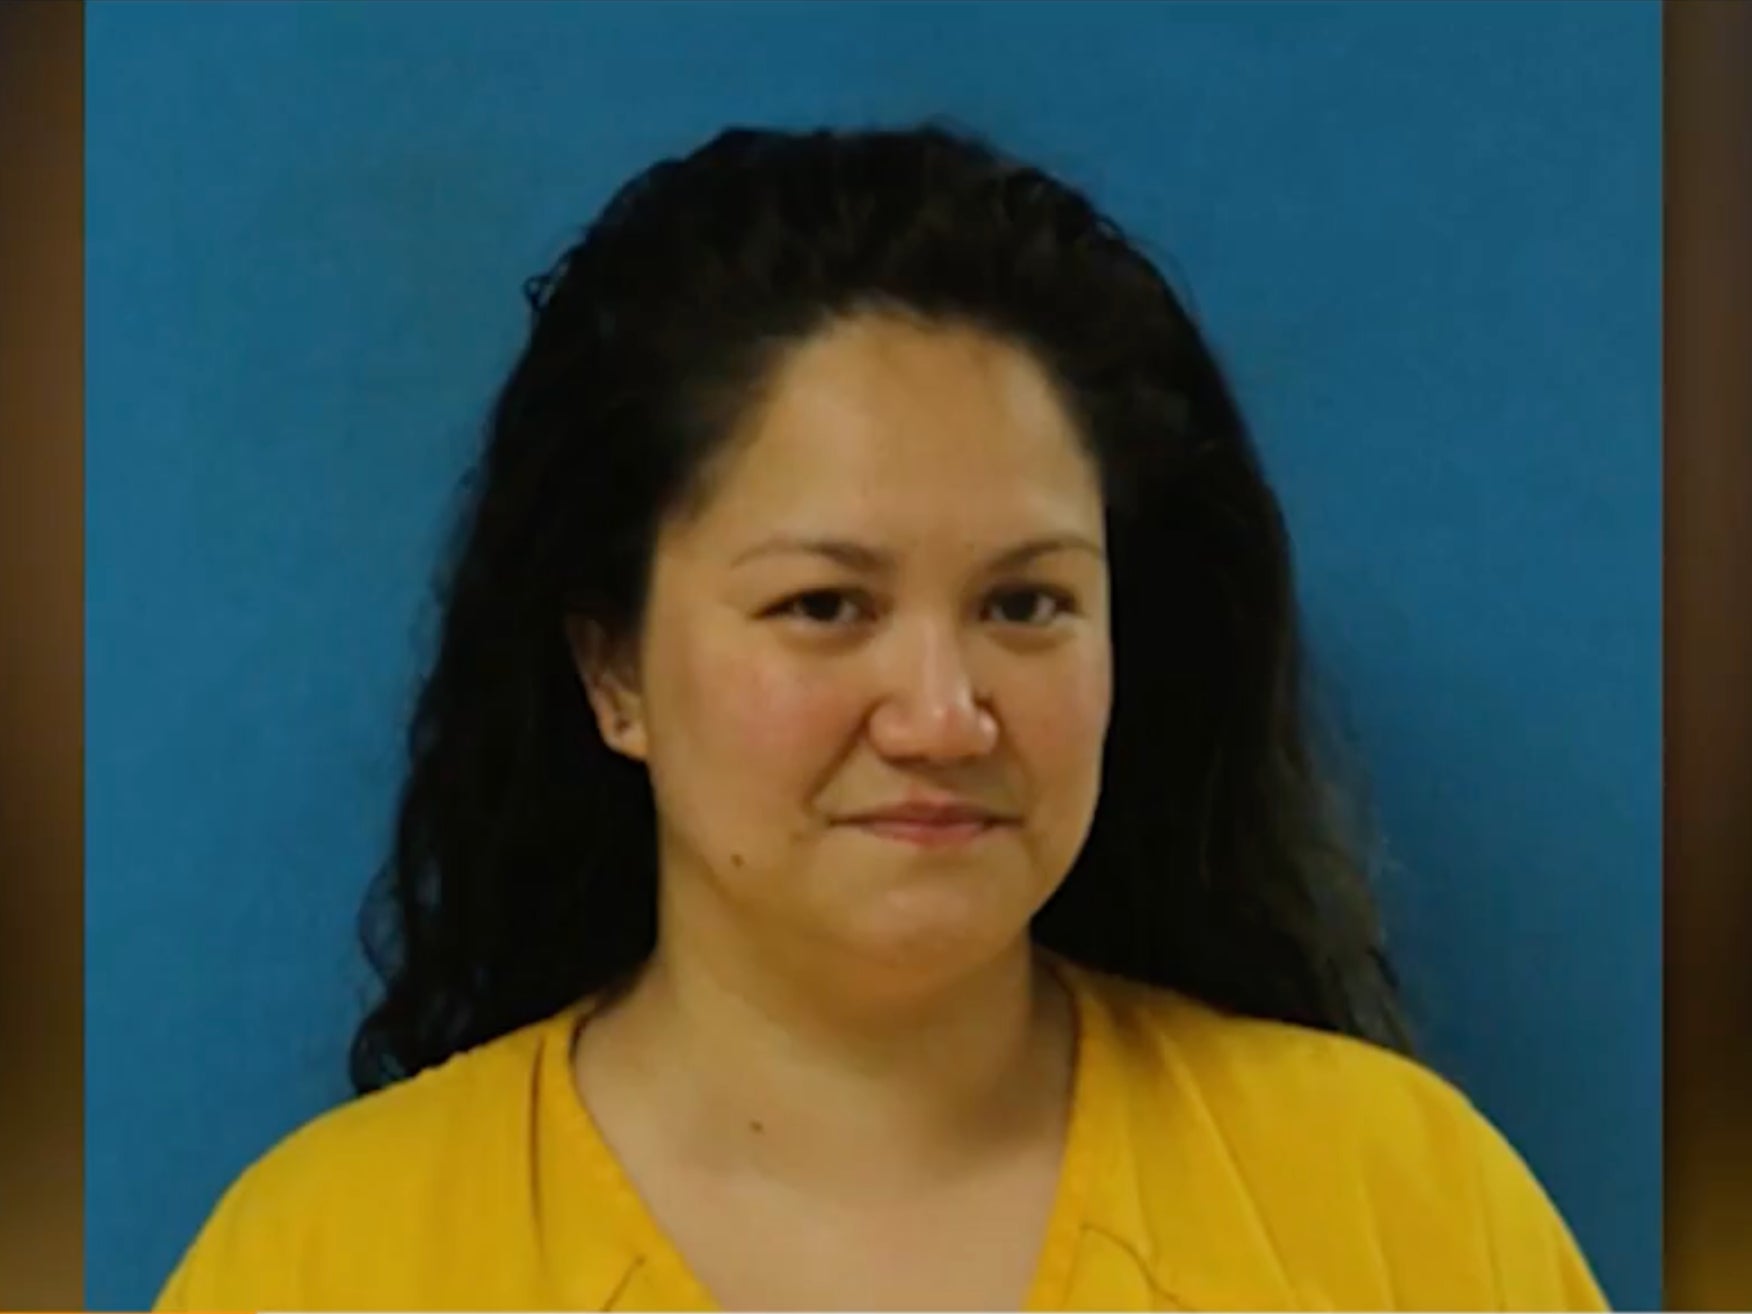 Elizabeth Wolf is charged with attempted capital murder after allegedly trying to drown another woman’s child in a pool